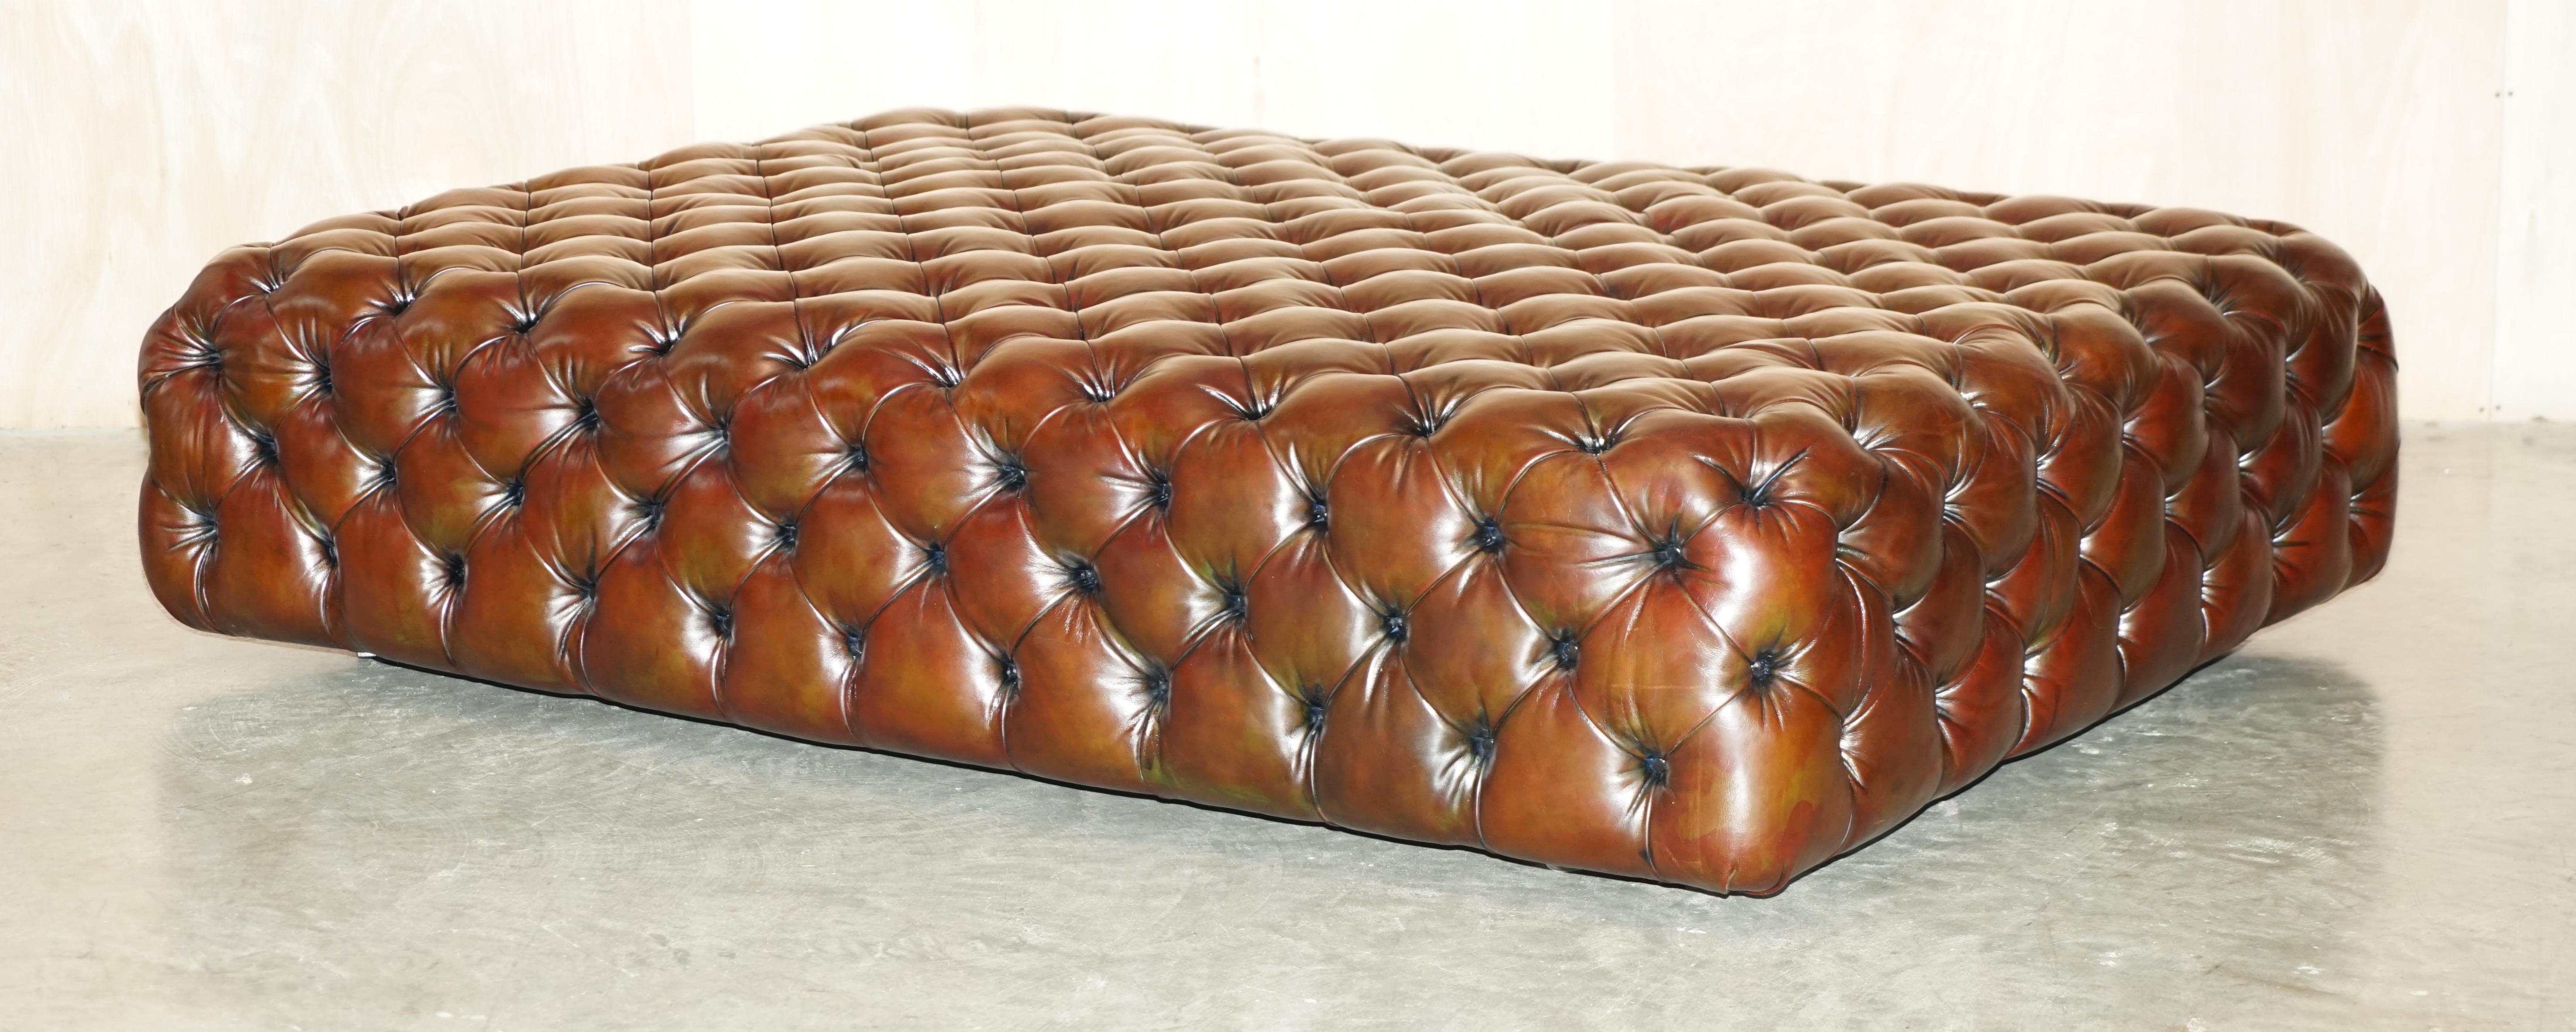 Royal House Antiques

Royal House Antiques is delighted to offer for sale the largest footstool / ottoman you will ever see! Made by George Smith Chelsea it is the size of a double bed

Please note the delivery fee listed is just a guide, it covers